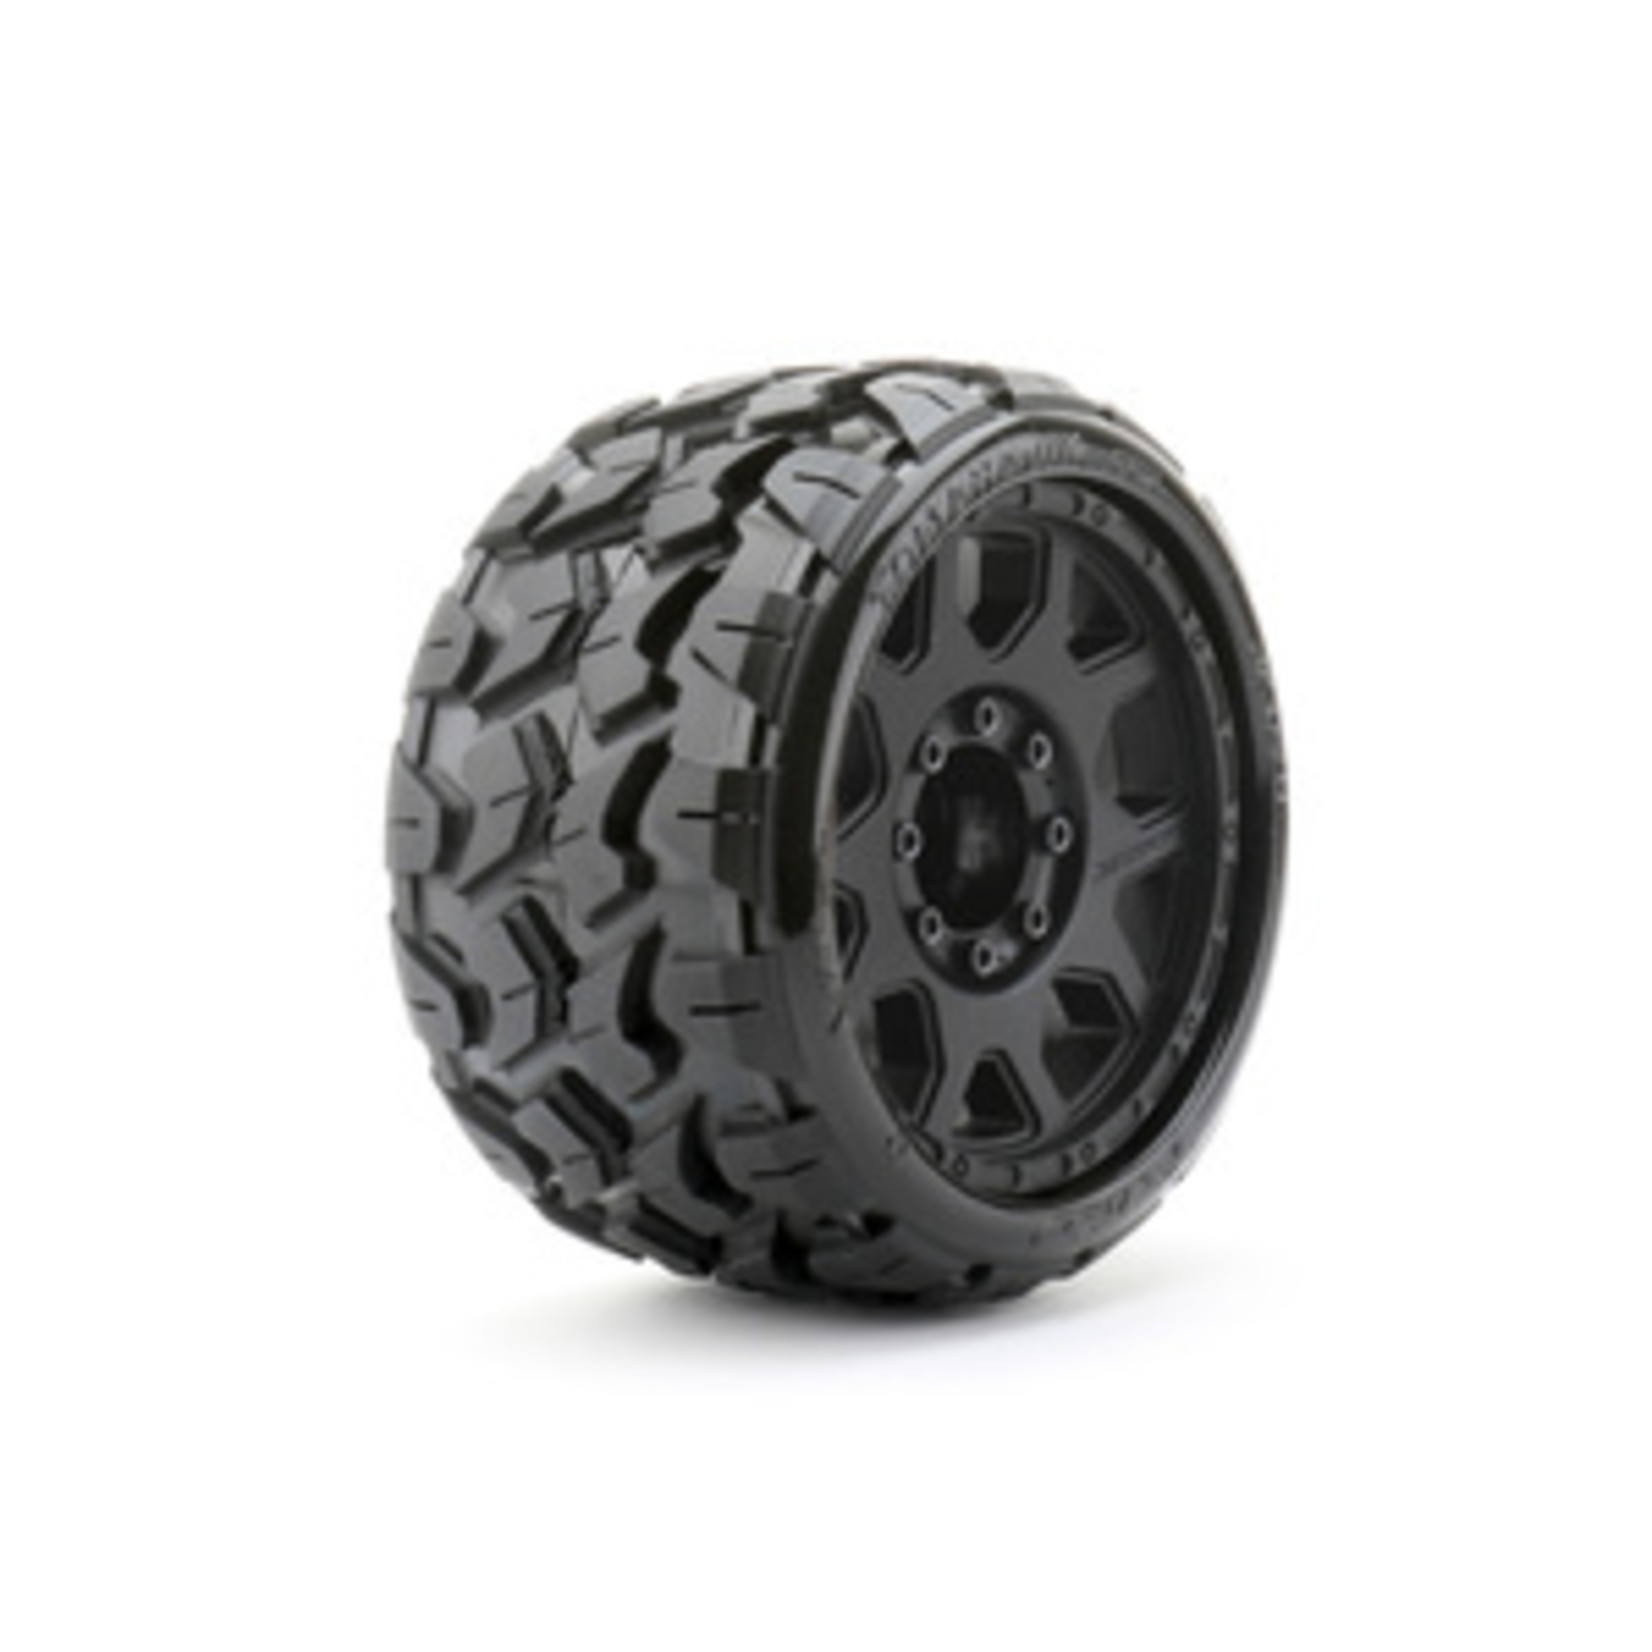 Jetko Tires JKO1601CBMSGBB2 1/8 SGT 3.8 Tomahawk Tires Mounted on Black Claw Rims, Medium Soft, Belted, 17mm 1/2" Offset (2)